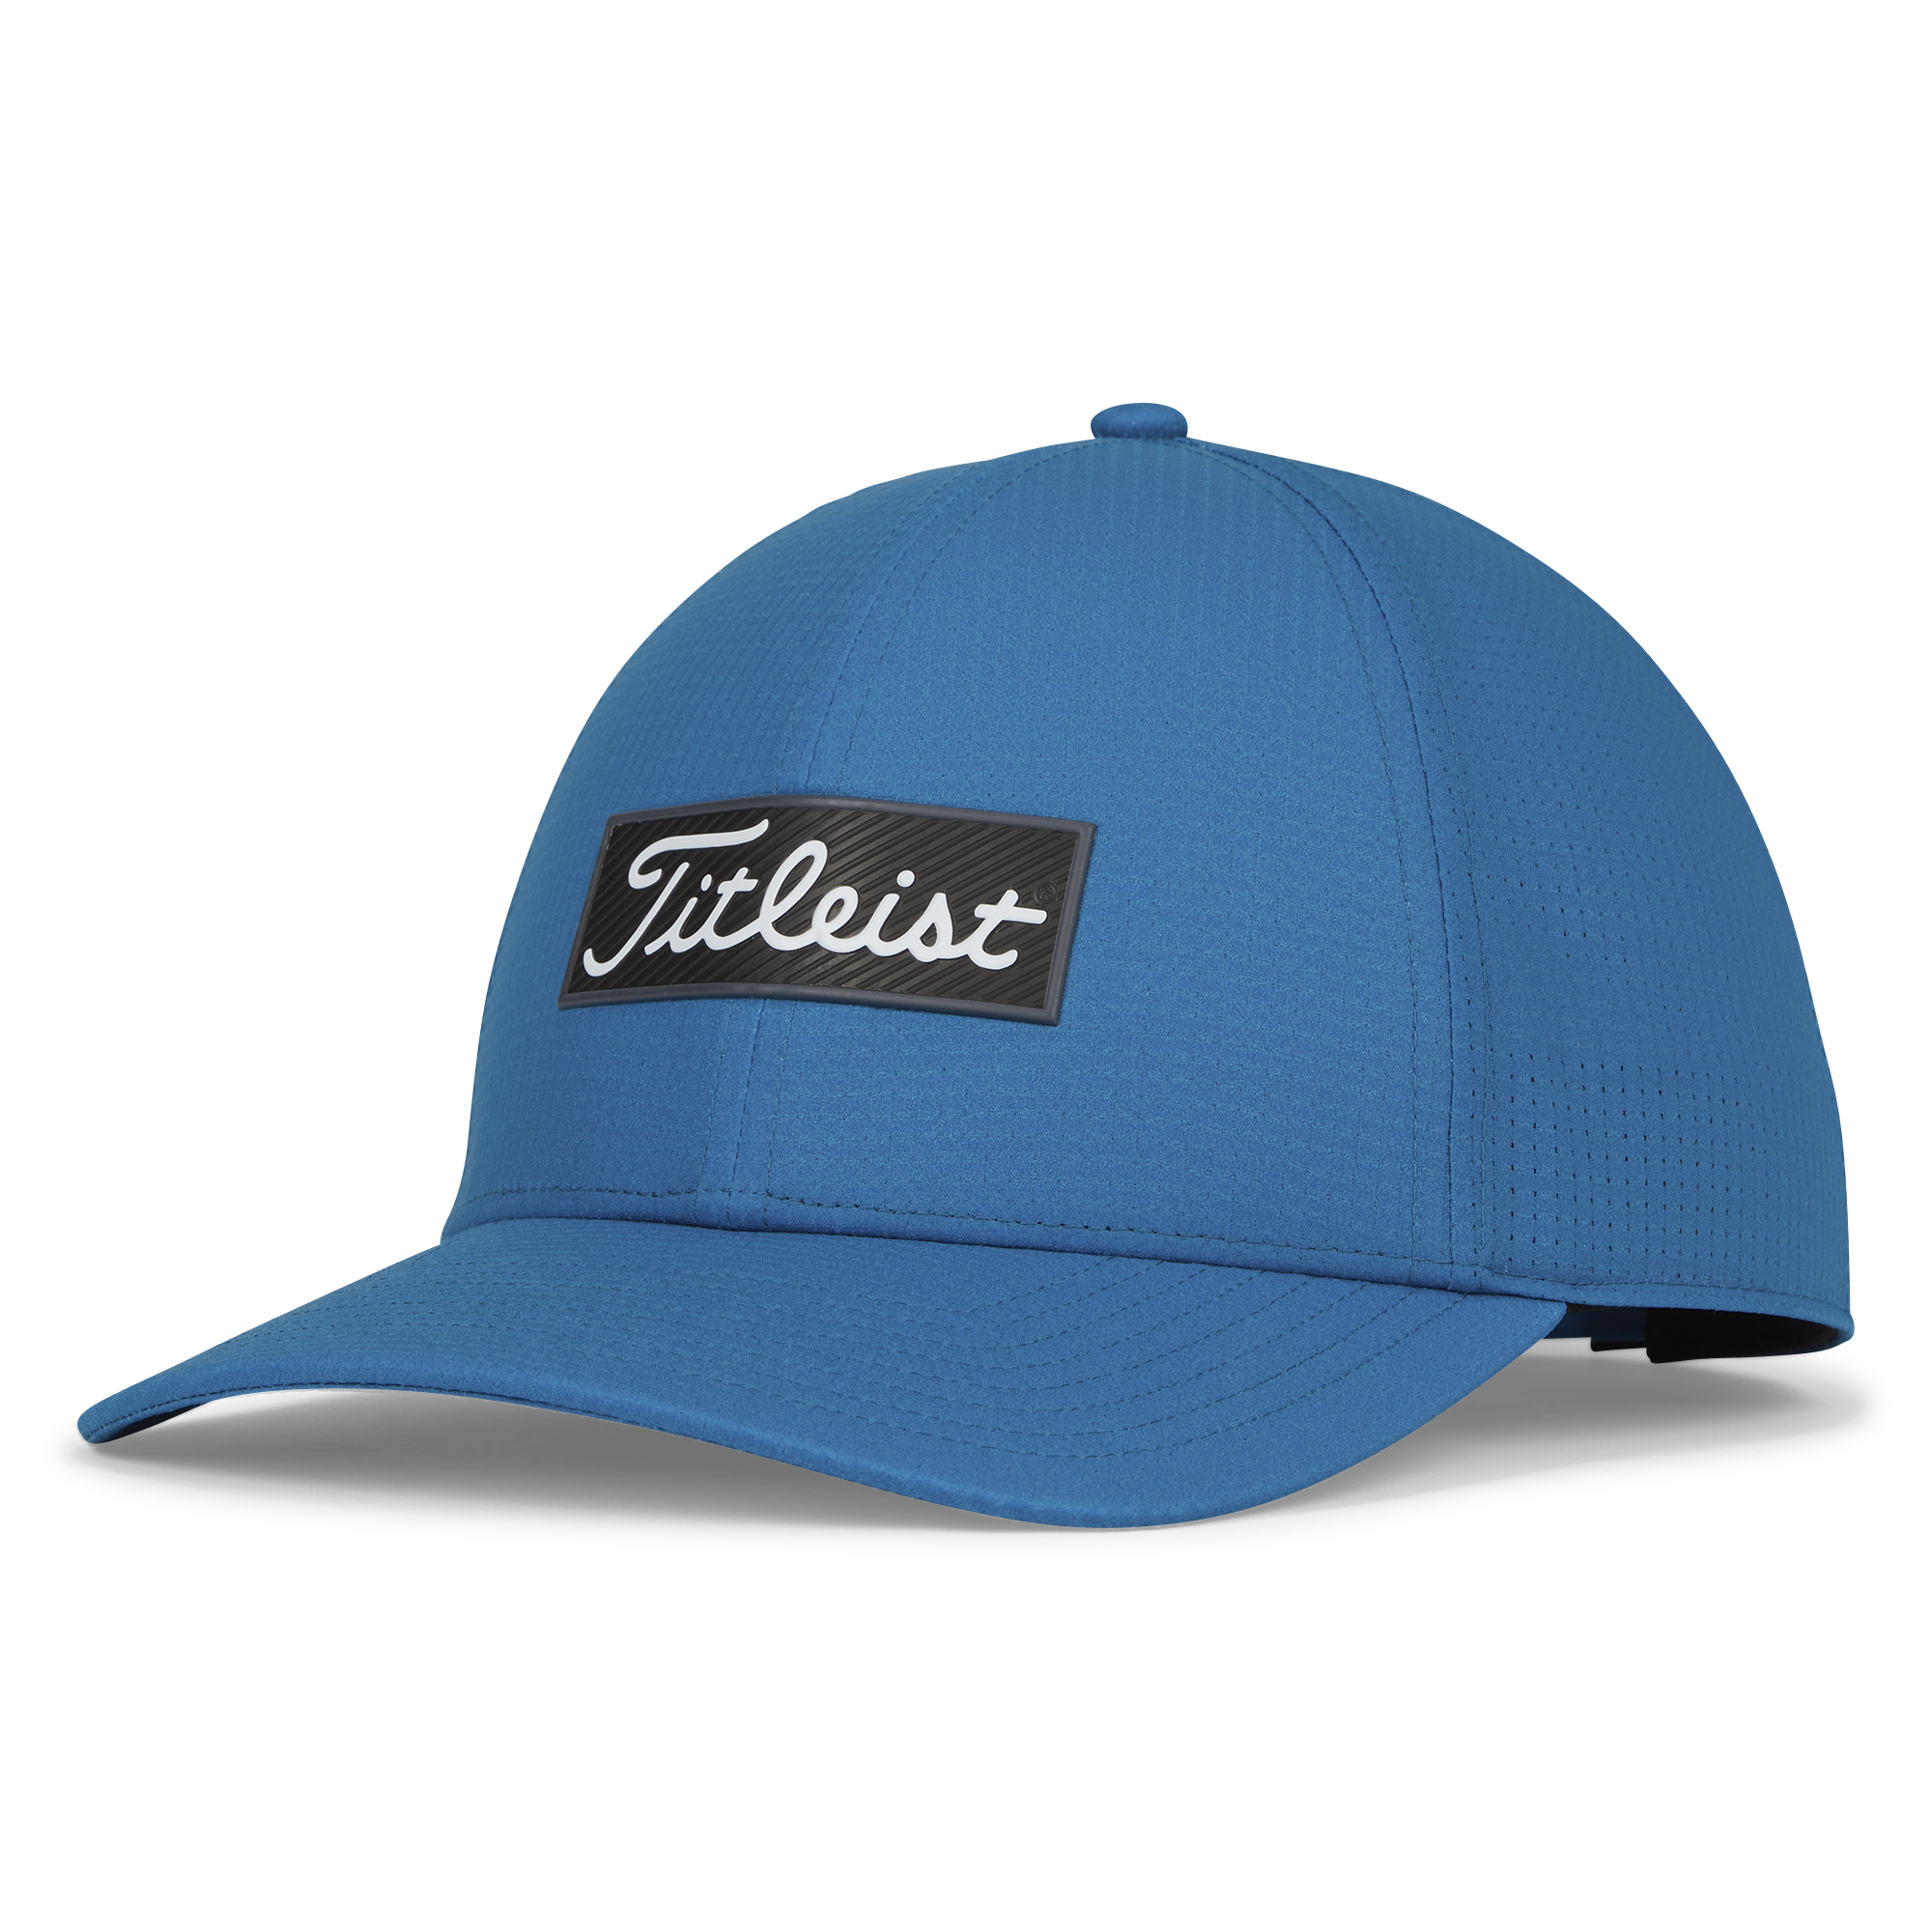 Titleist Official Oceanside in Reef/White